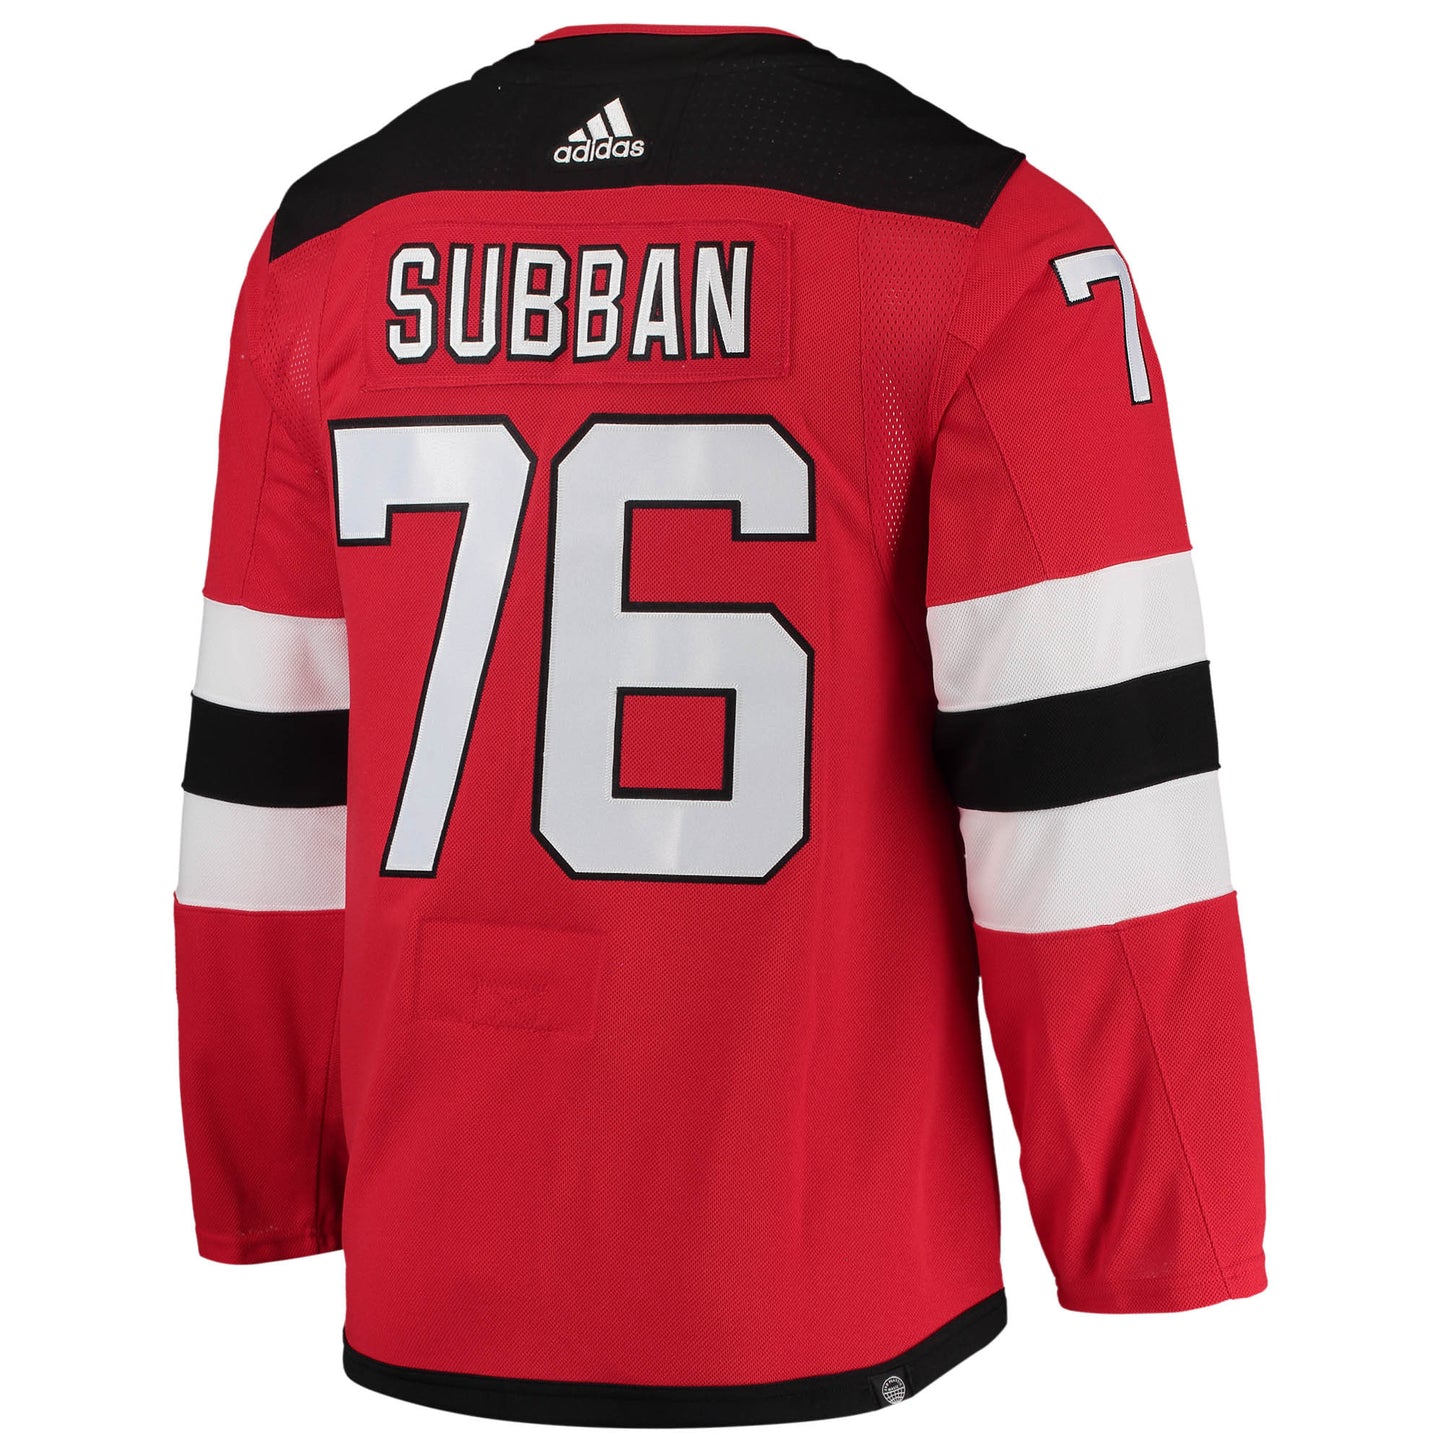 P.K. Subban New Jersey Devils adidas Home Primegreen Authentic Pro Player Jersey - Red